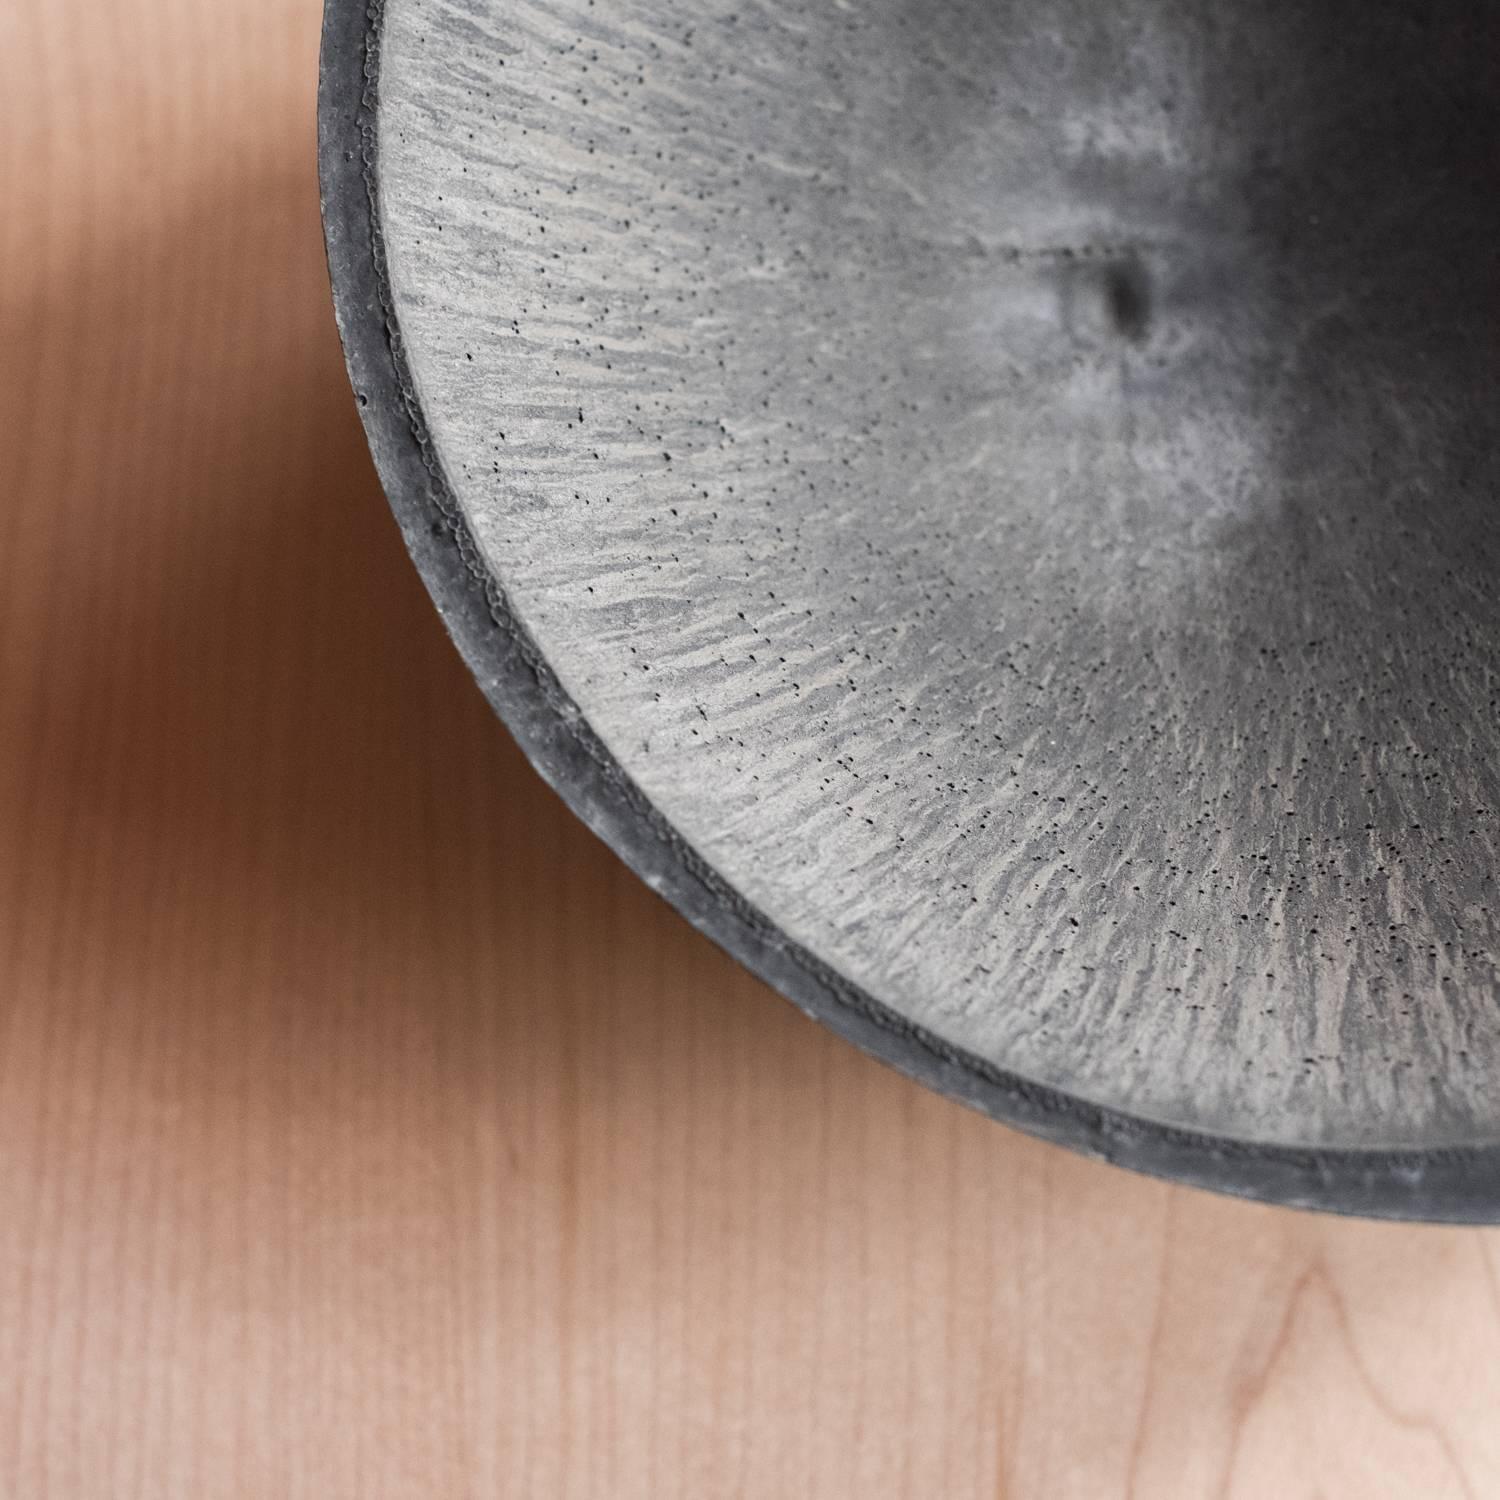 American Handmade Cast Concrete Bowl in Black Charcoal by UMÉ Studio